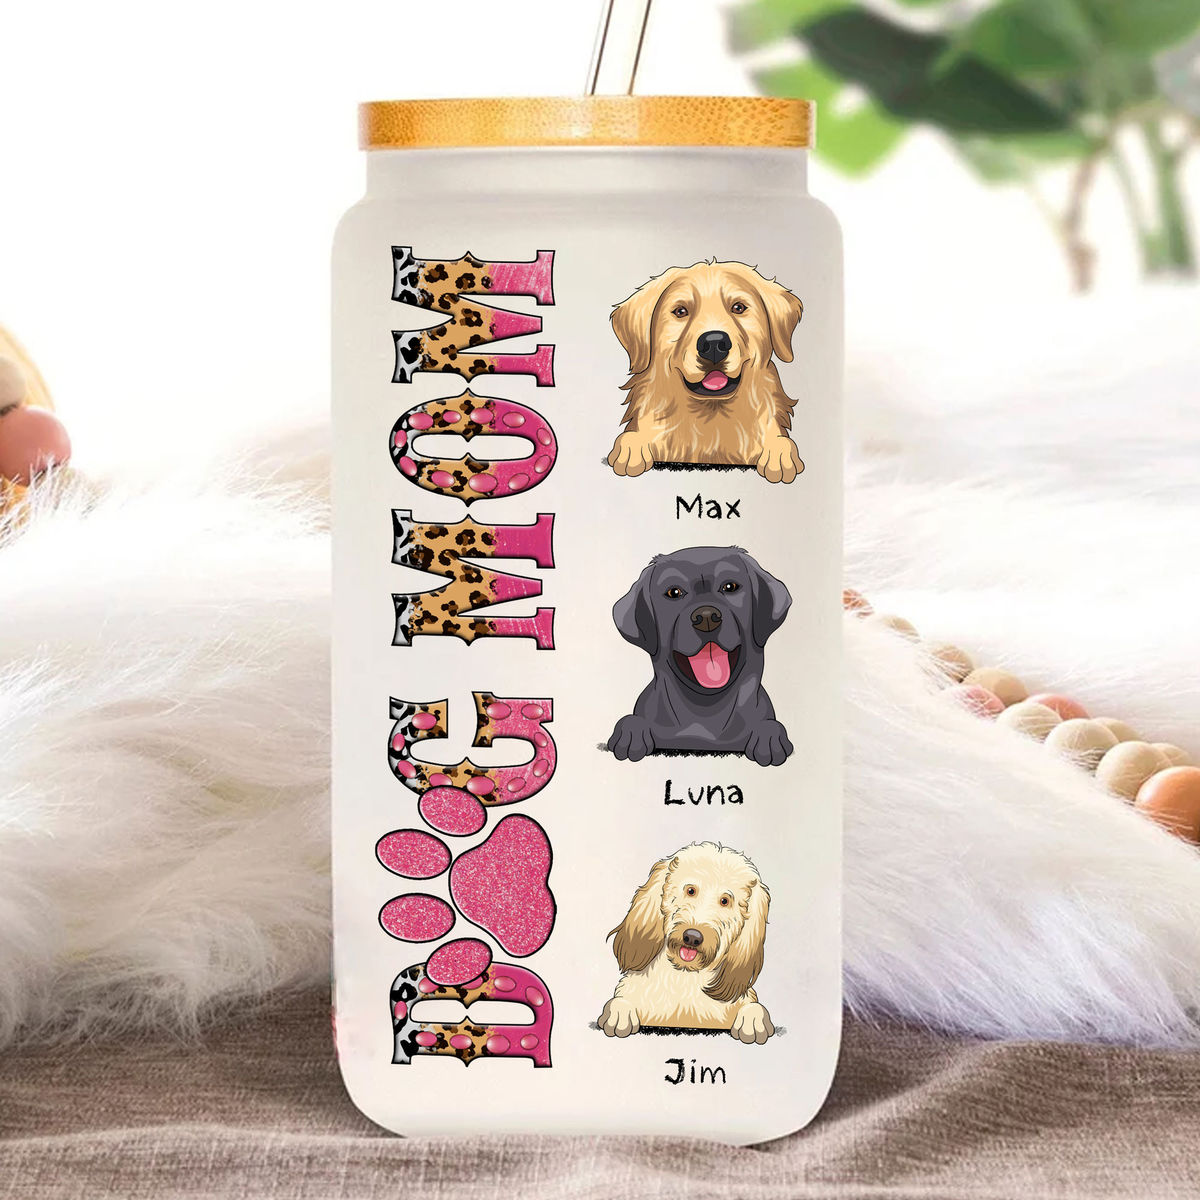 Up to 4 Dogs - Dog Lovers Tumbler Glass - Dog Mom (P)_1